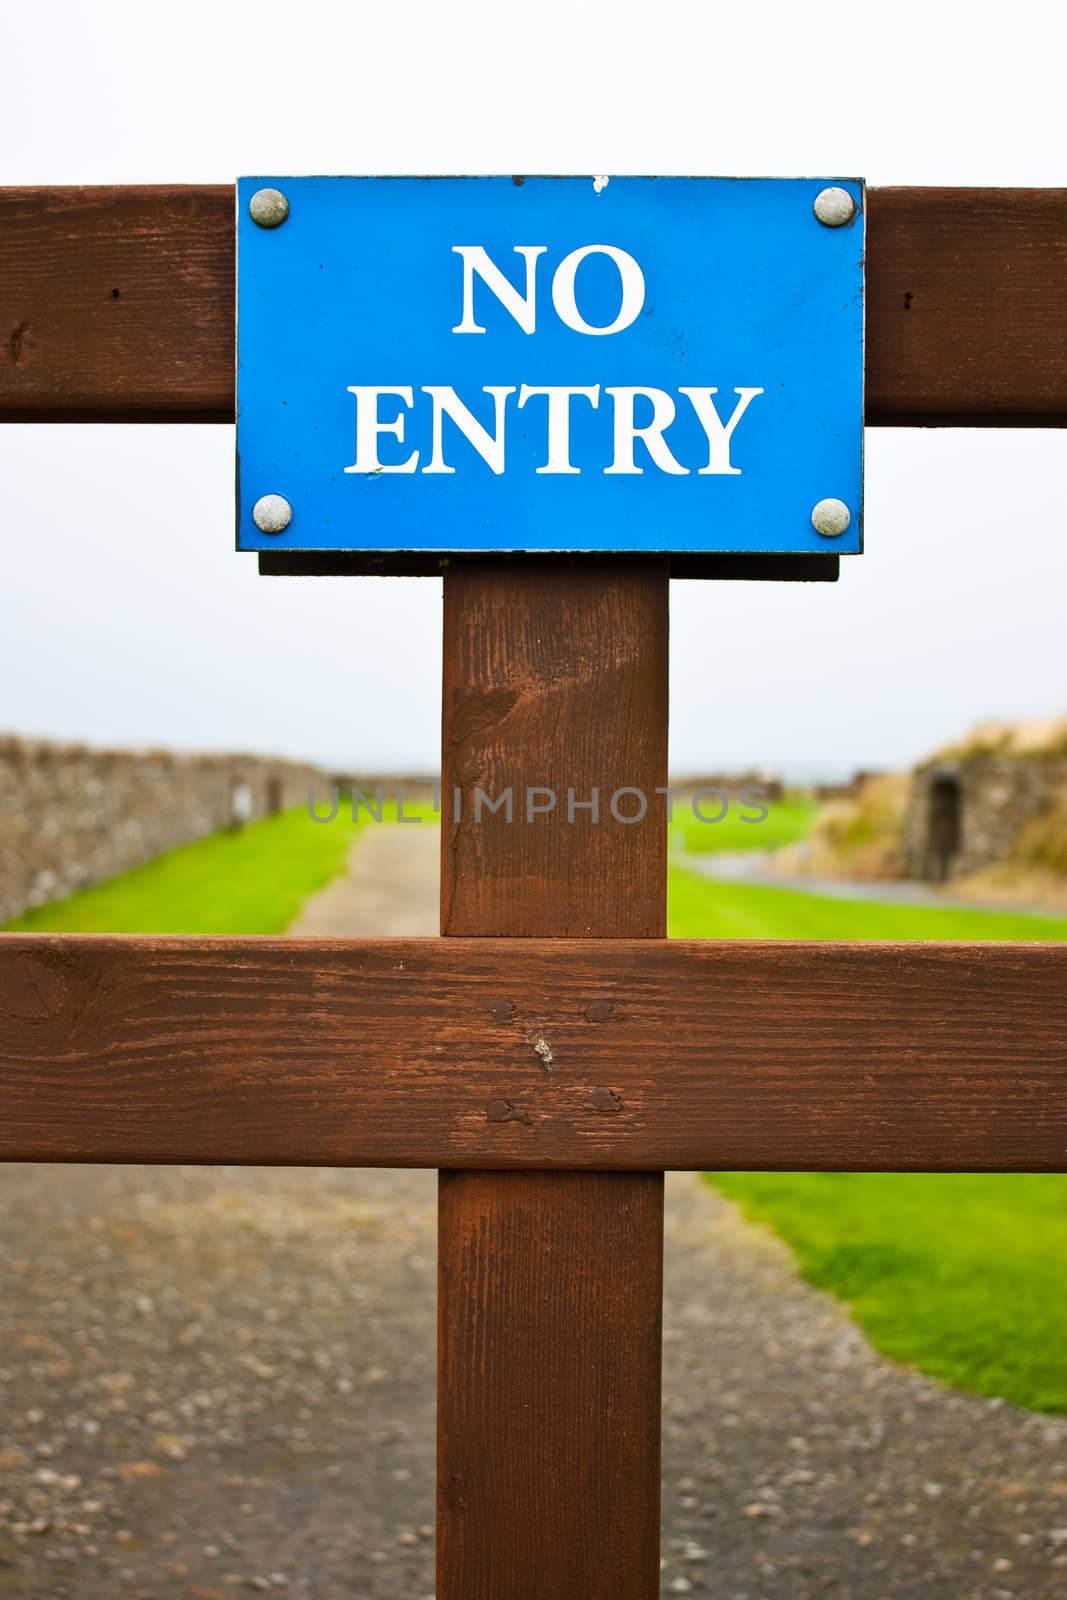 No entry by Perseomedusa